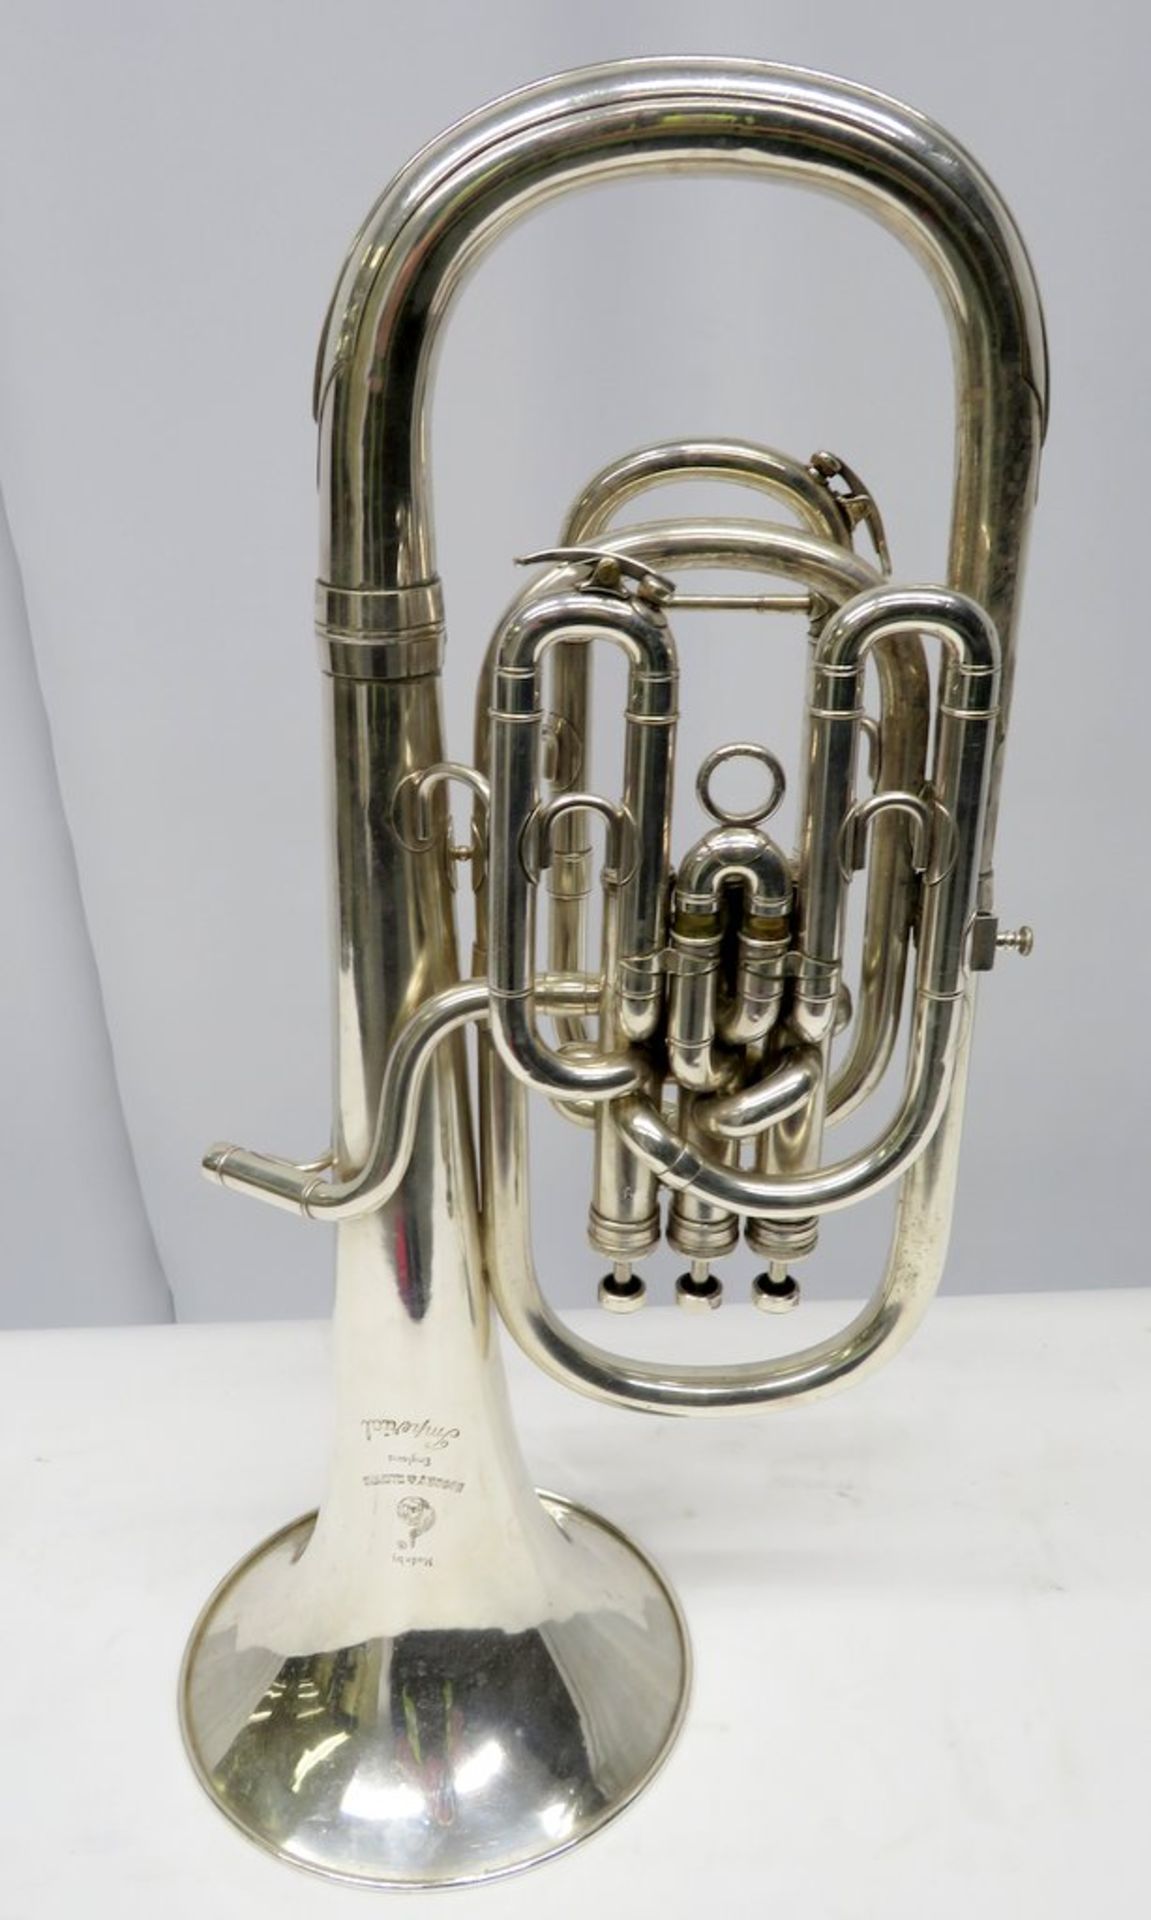 Boosey & Hawkes Imperial Baritone sax horn with case. Serial number: 458044. - Image 2 of 12